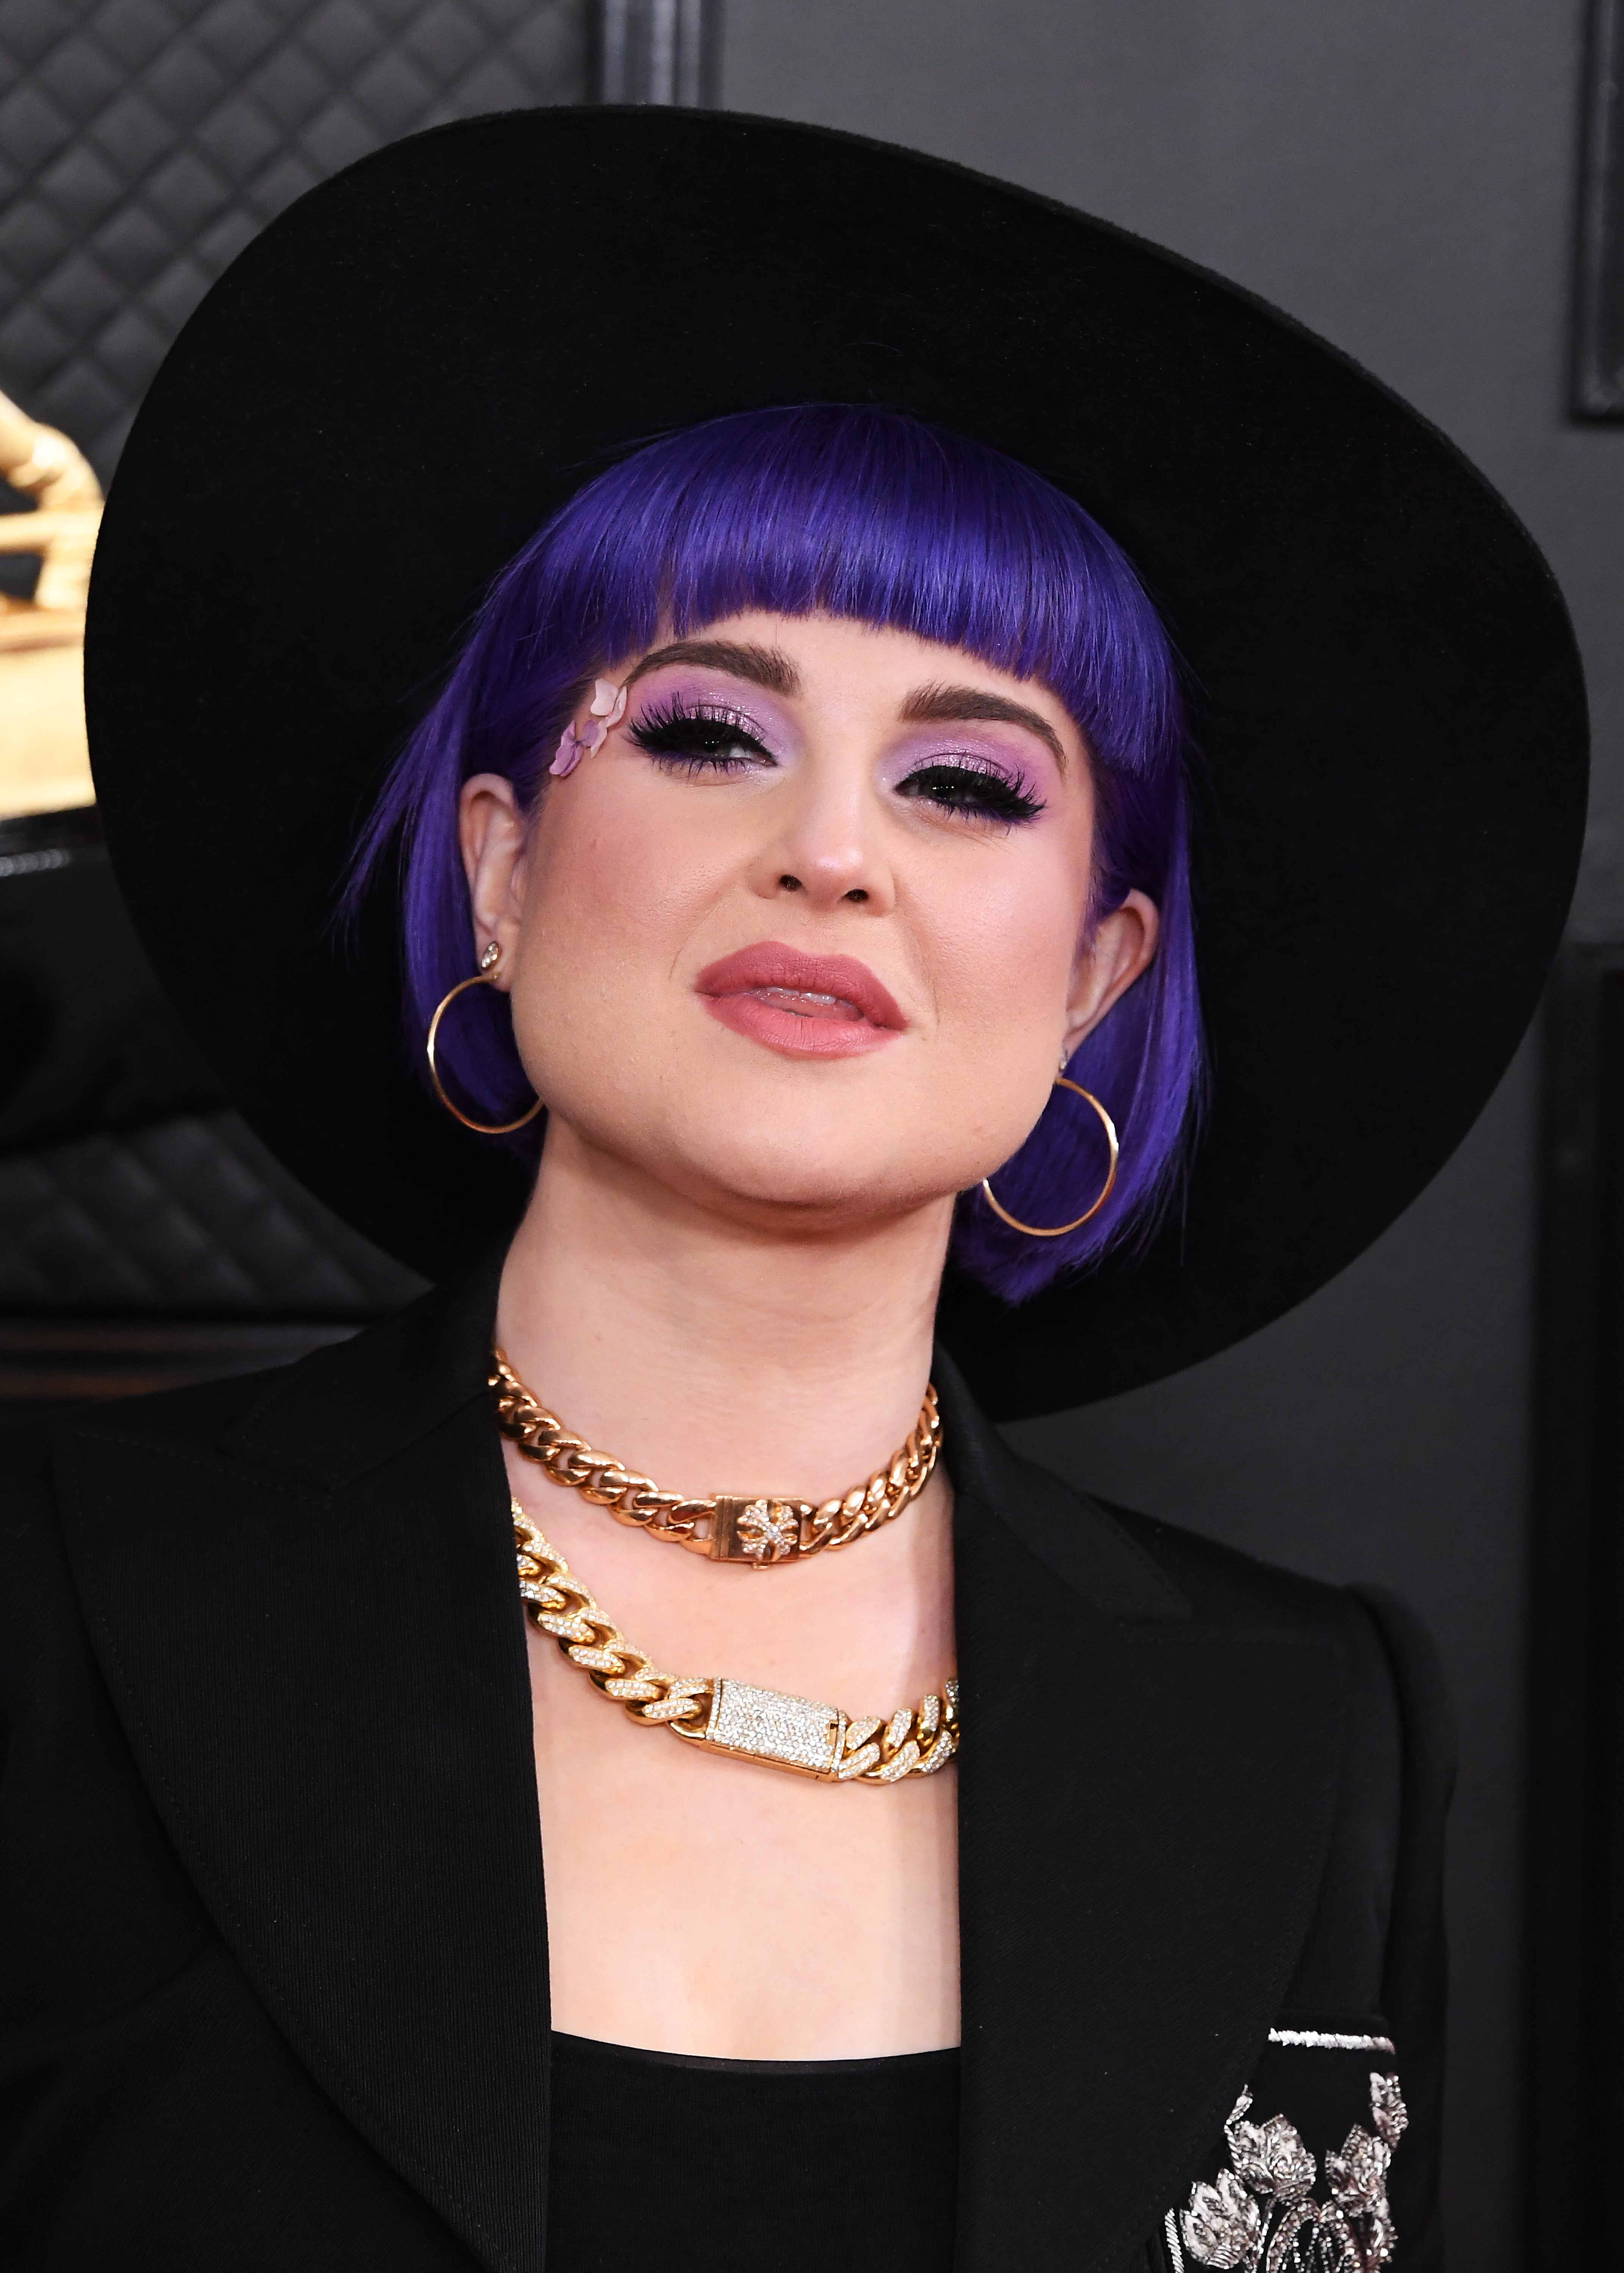 Kelly Osbourne at the 62nd Annual Grammy Awards in Los Angeles, California on January 26, 2020 | Source: Getty Images